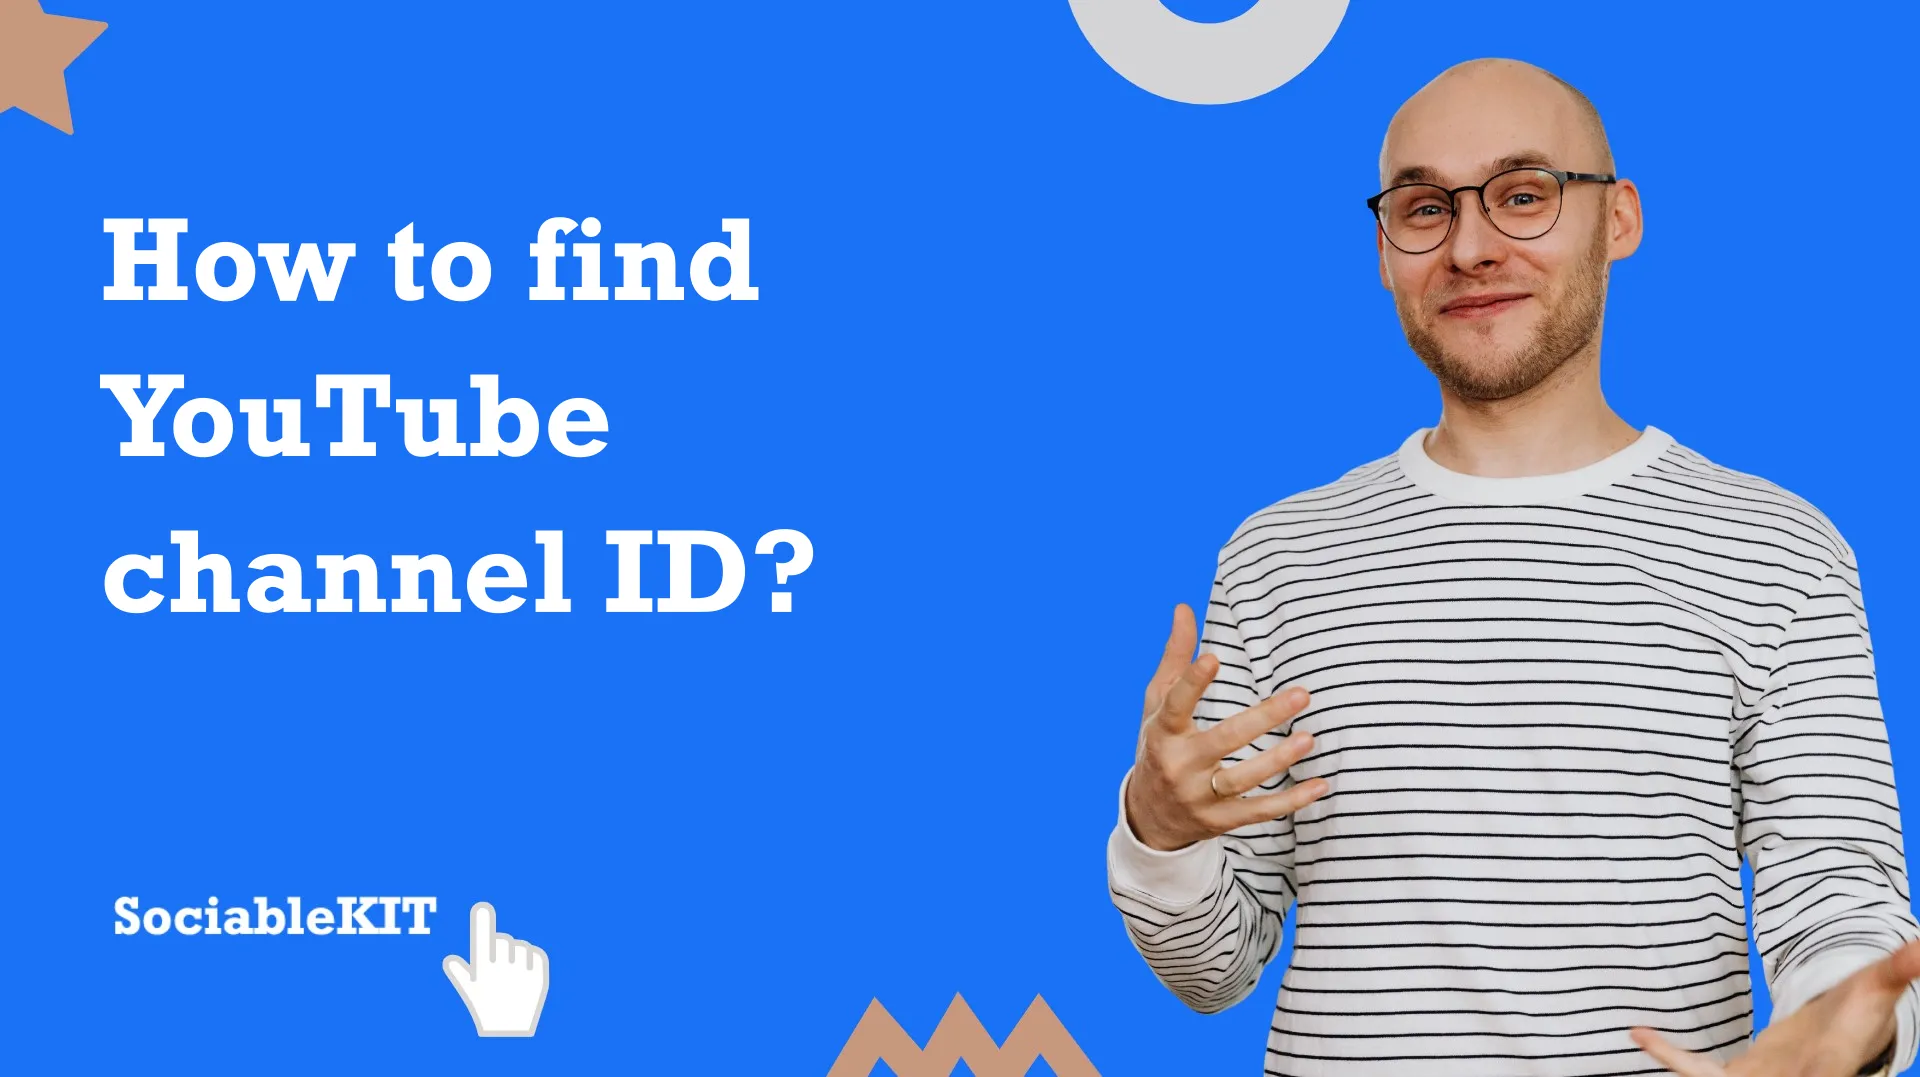 How to find YouTube channel ID?